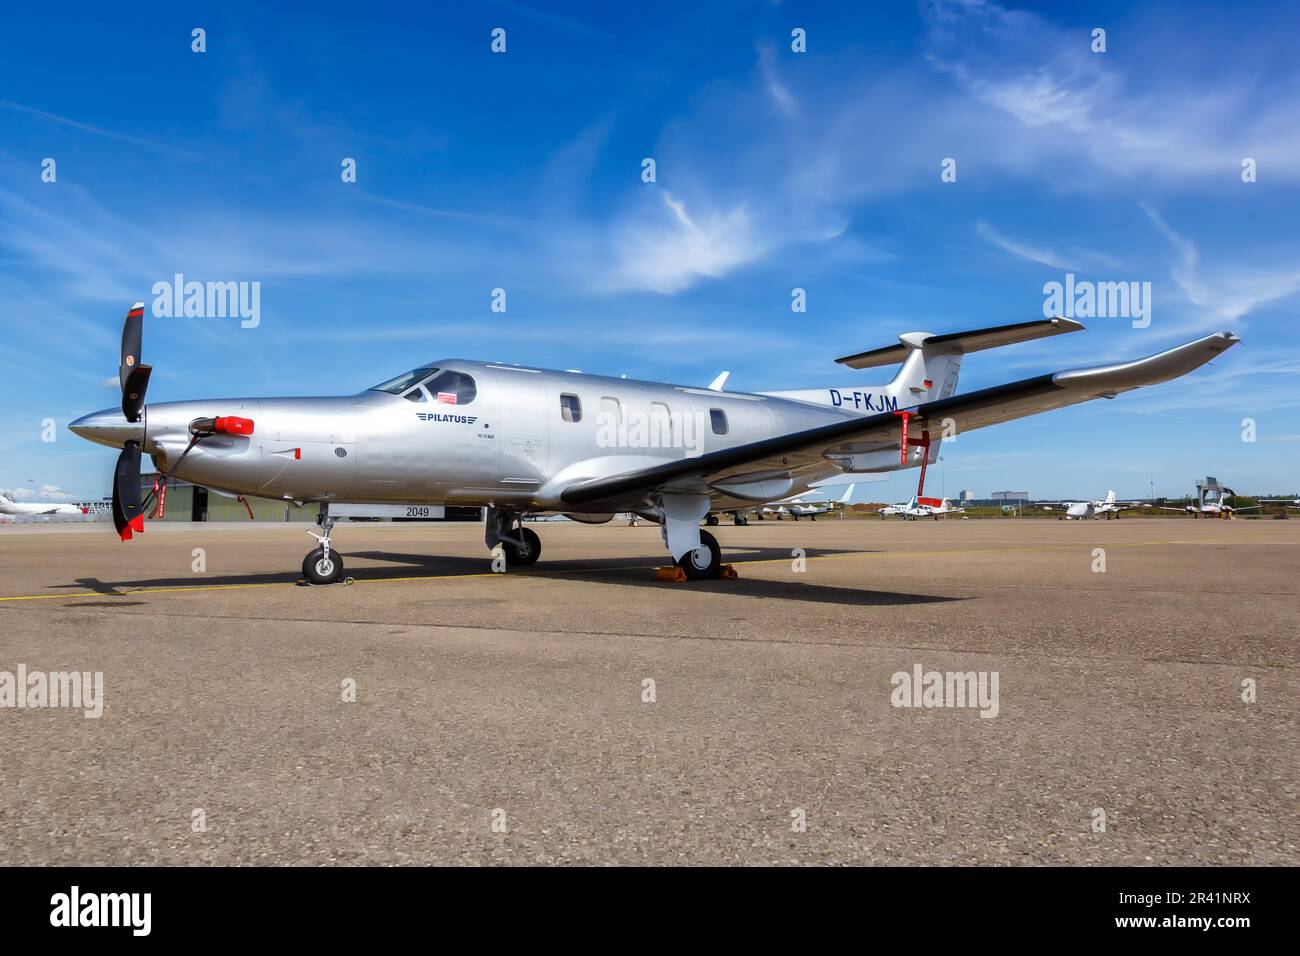 Private Pilatus PC-12 aircraft Stuttgart Airport in Germany Stock Photo